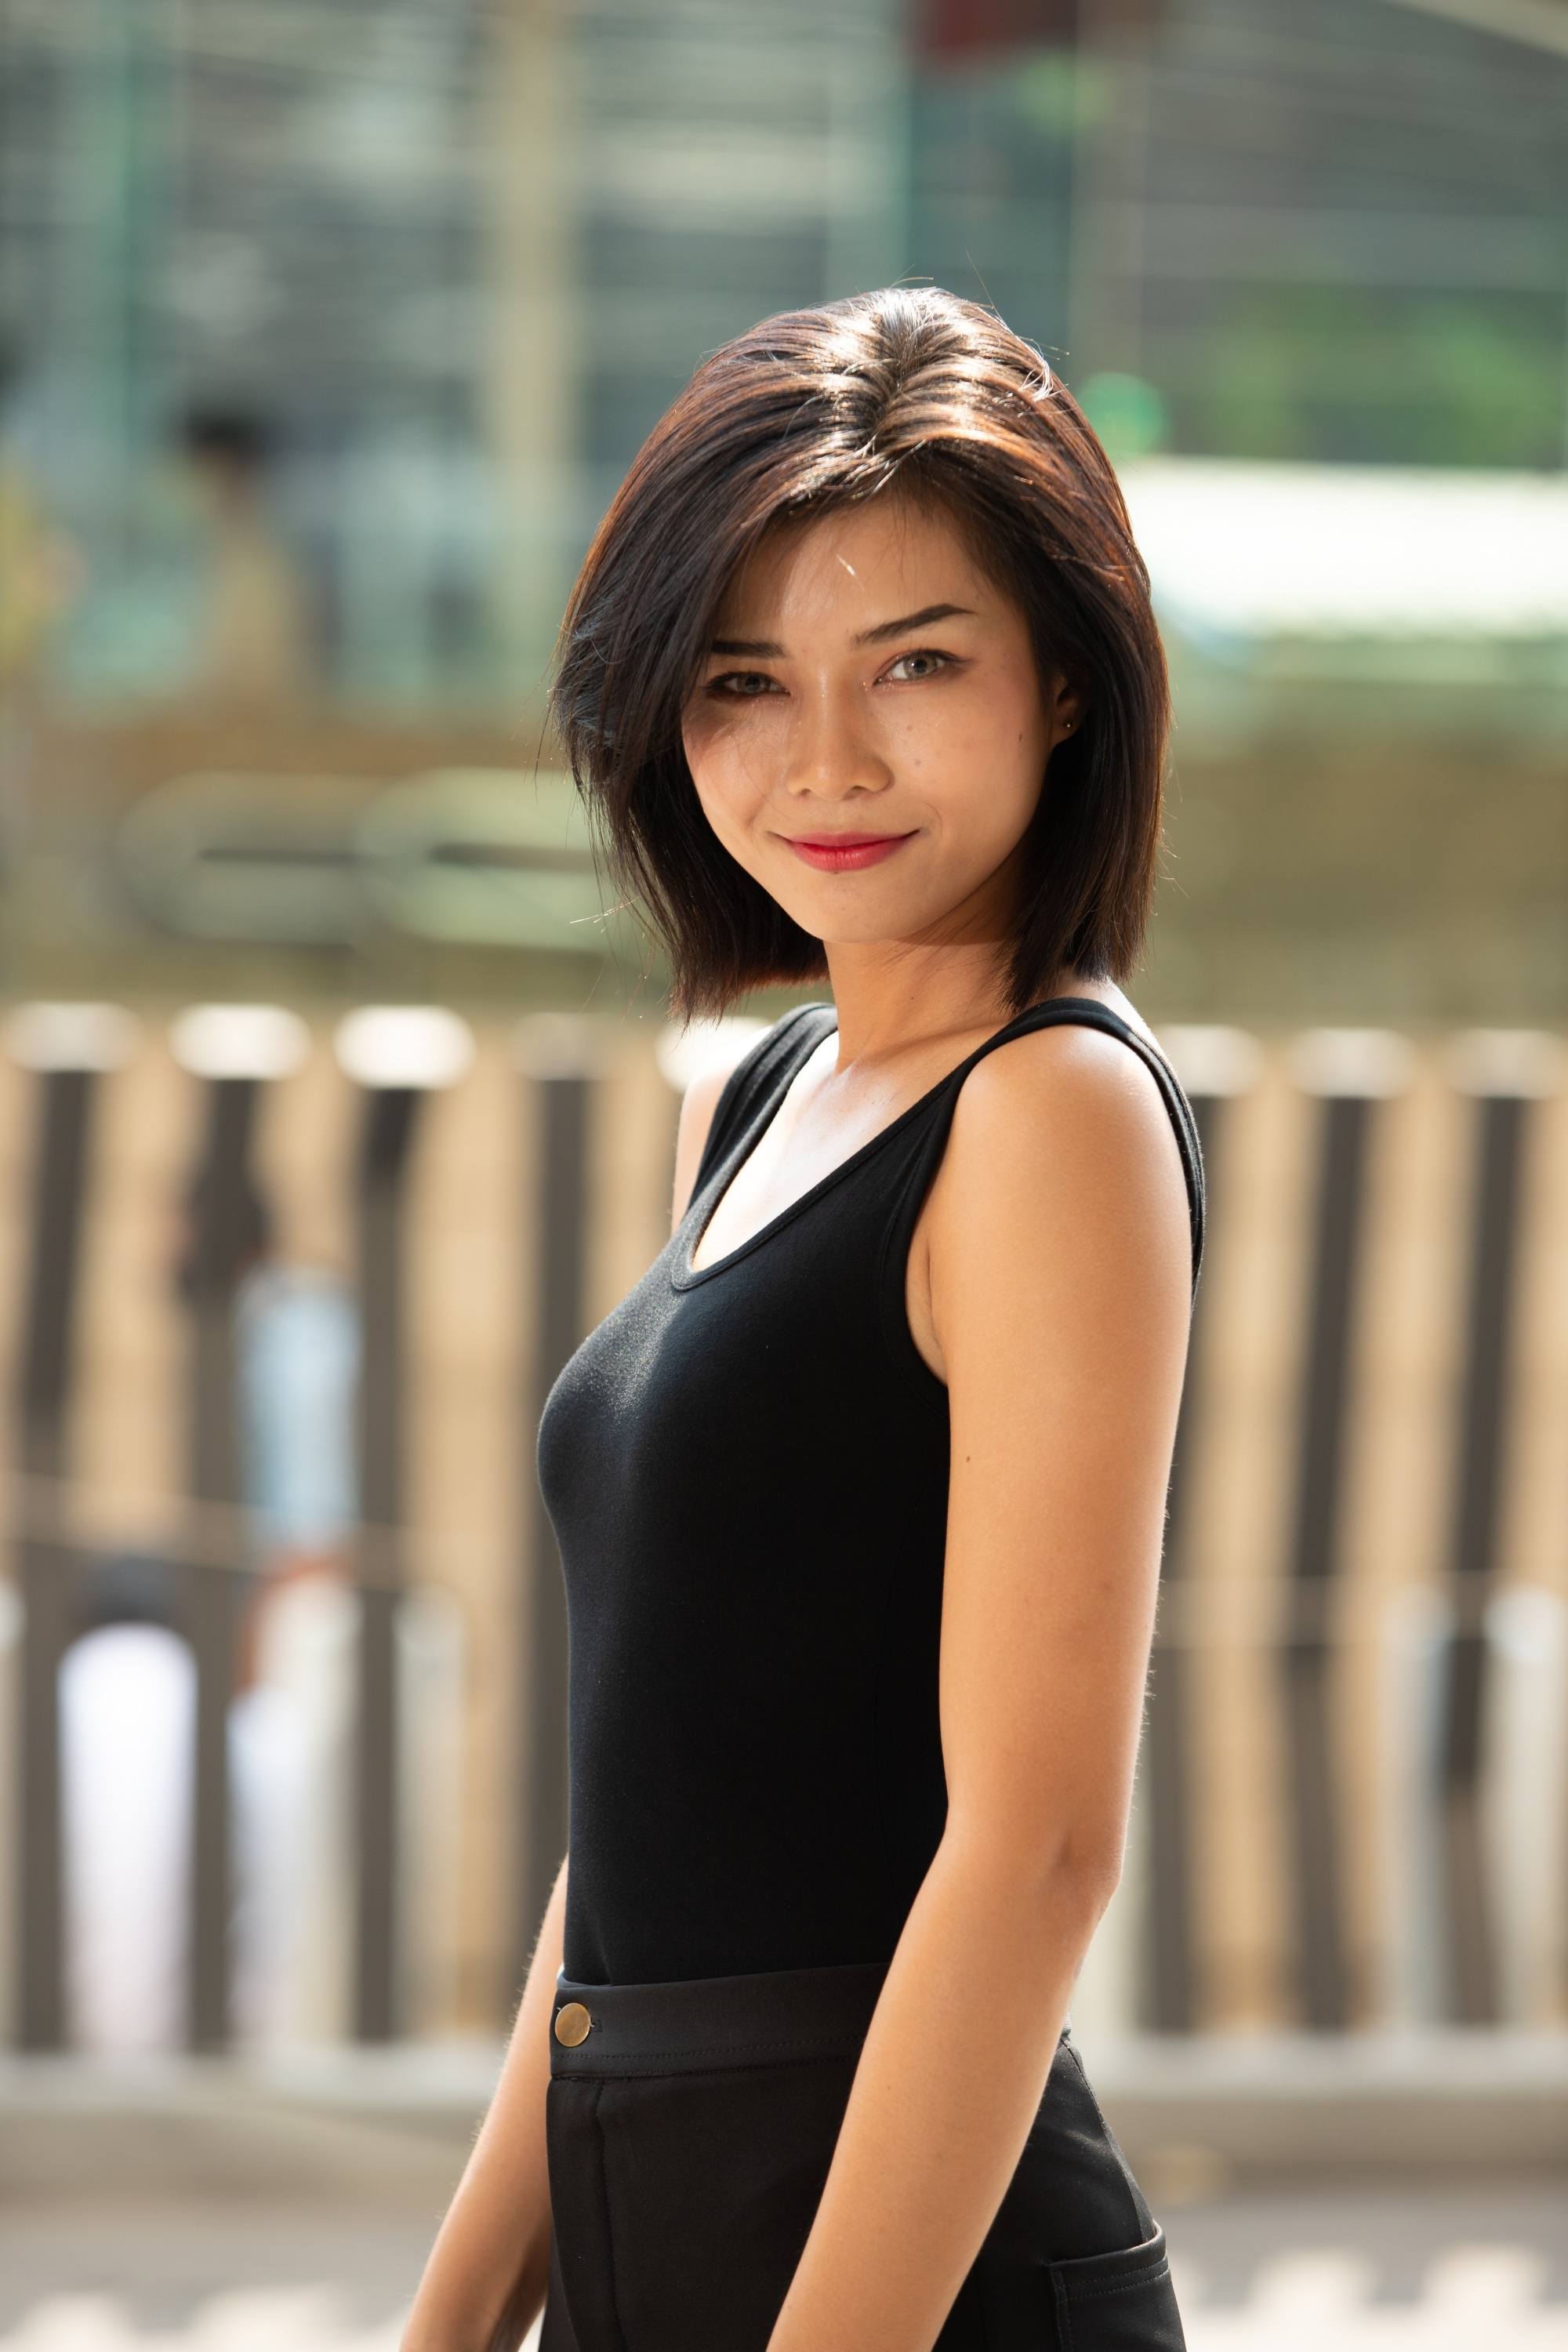 Asian woman with a bob haircut with side-swept bangs